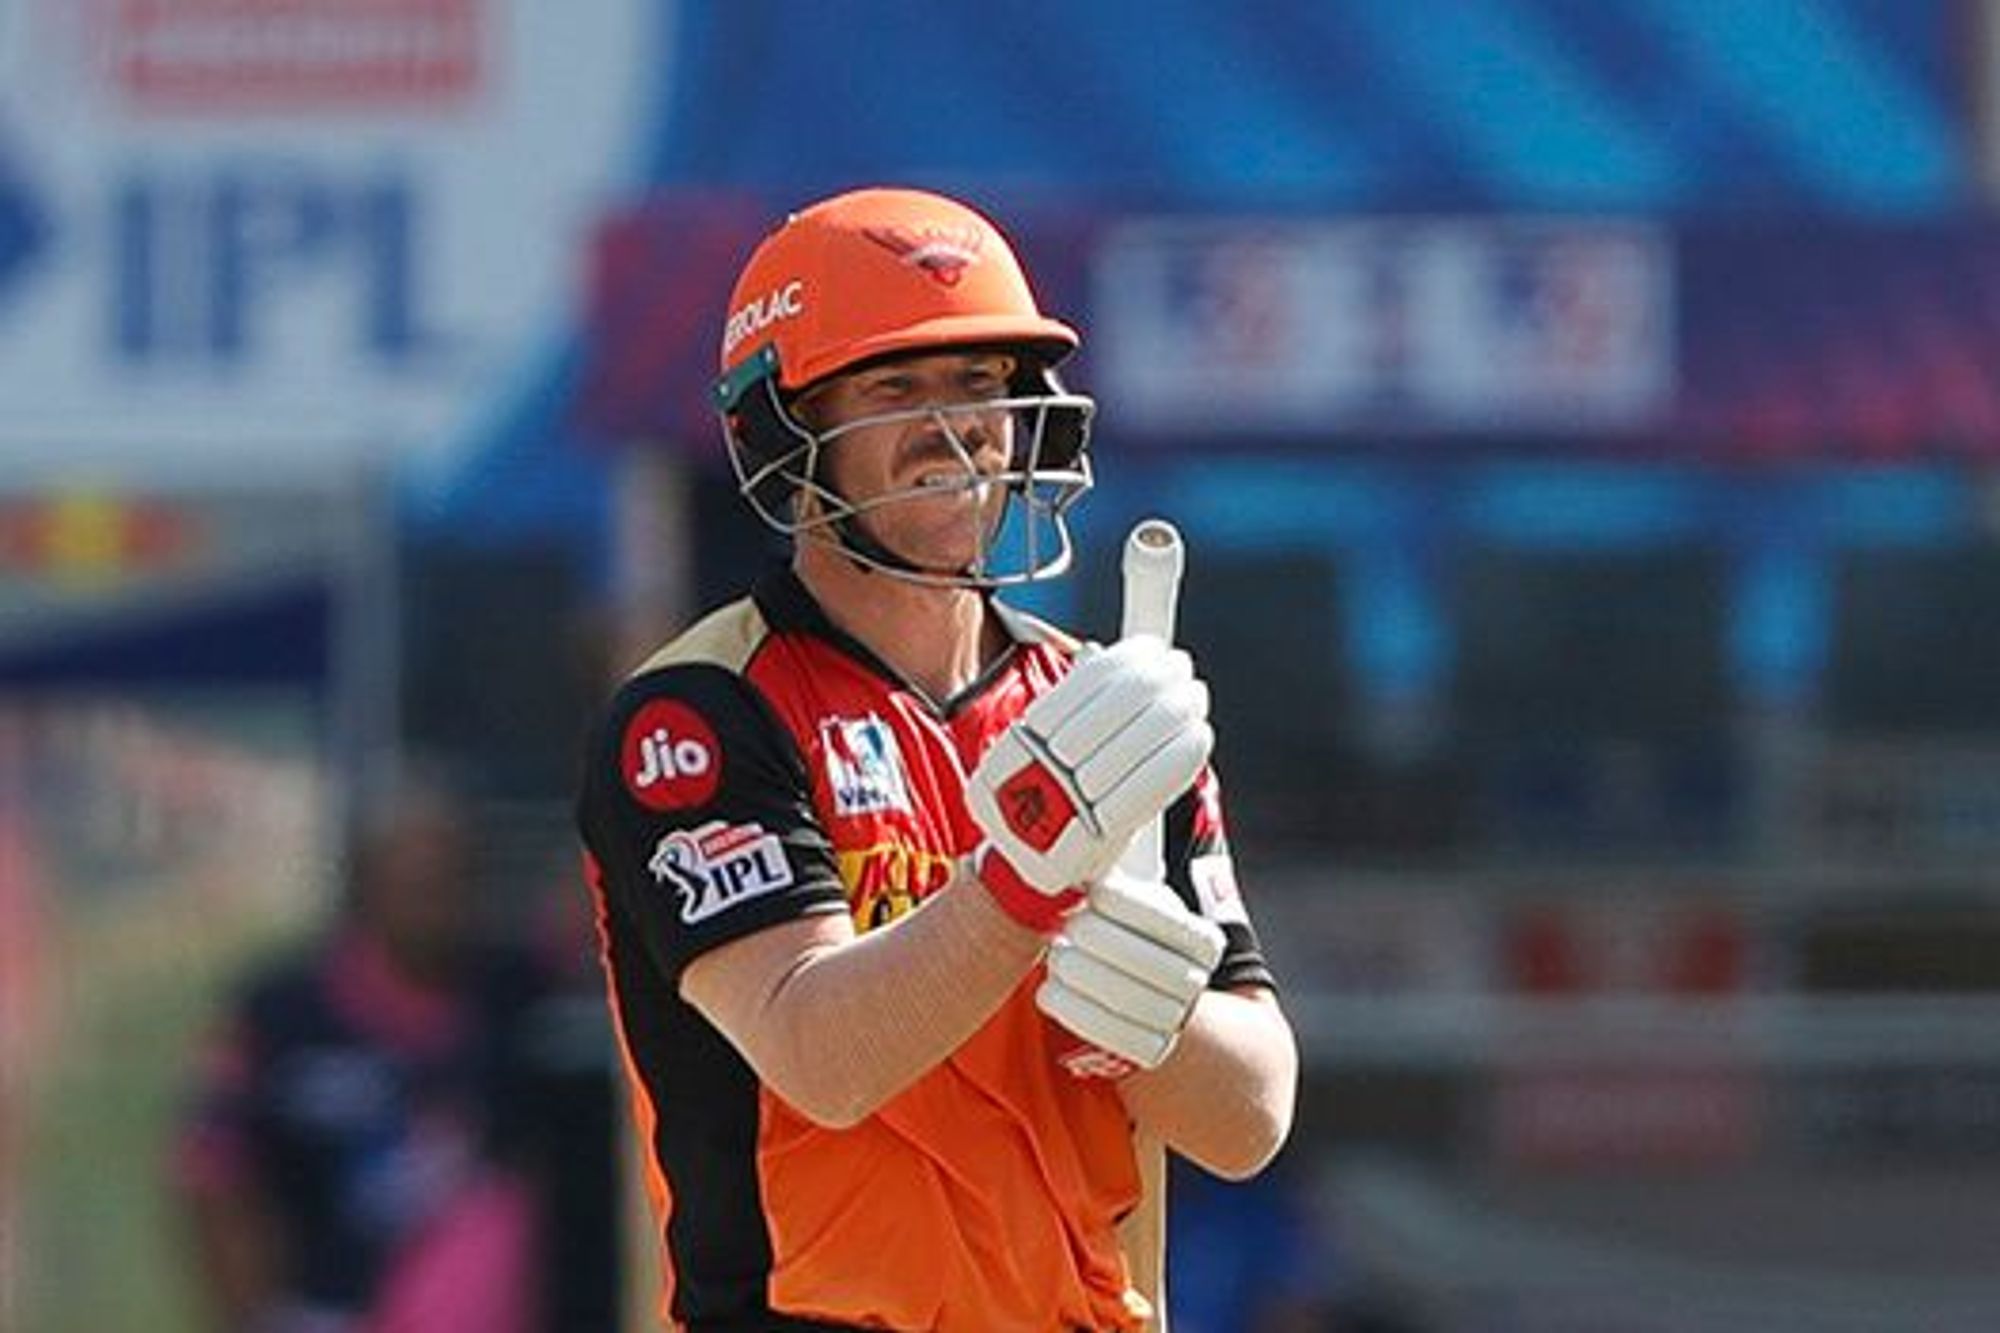 Three bets from the PBKS vs SRH game that can help you turn really rich